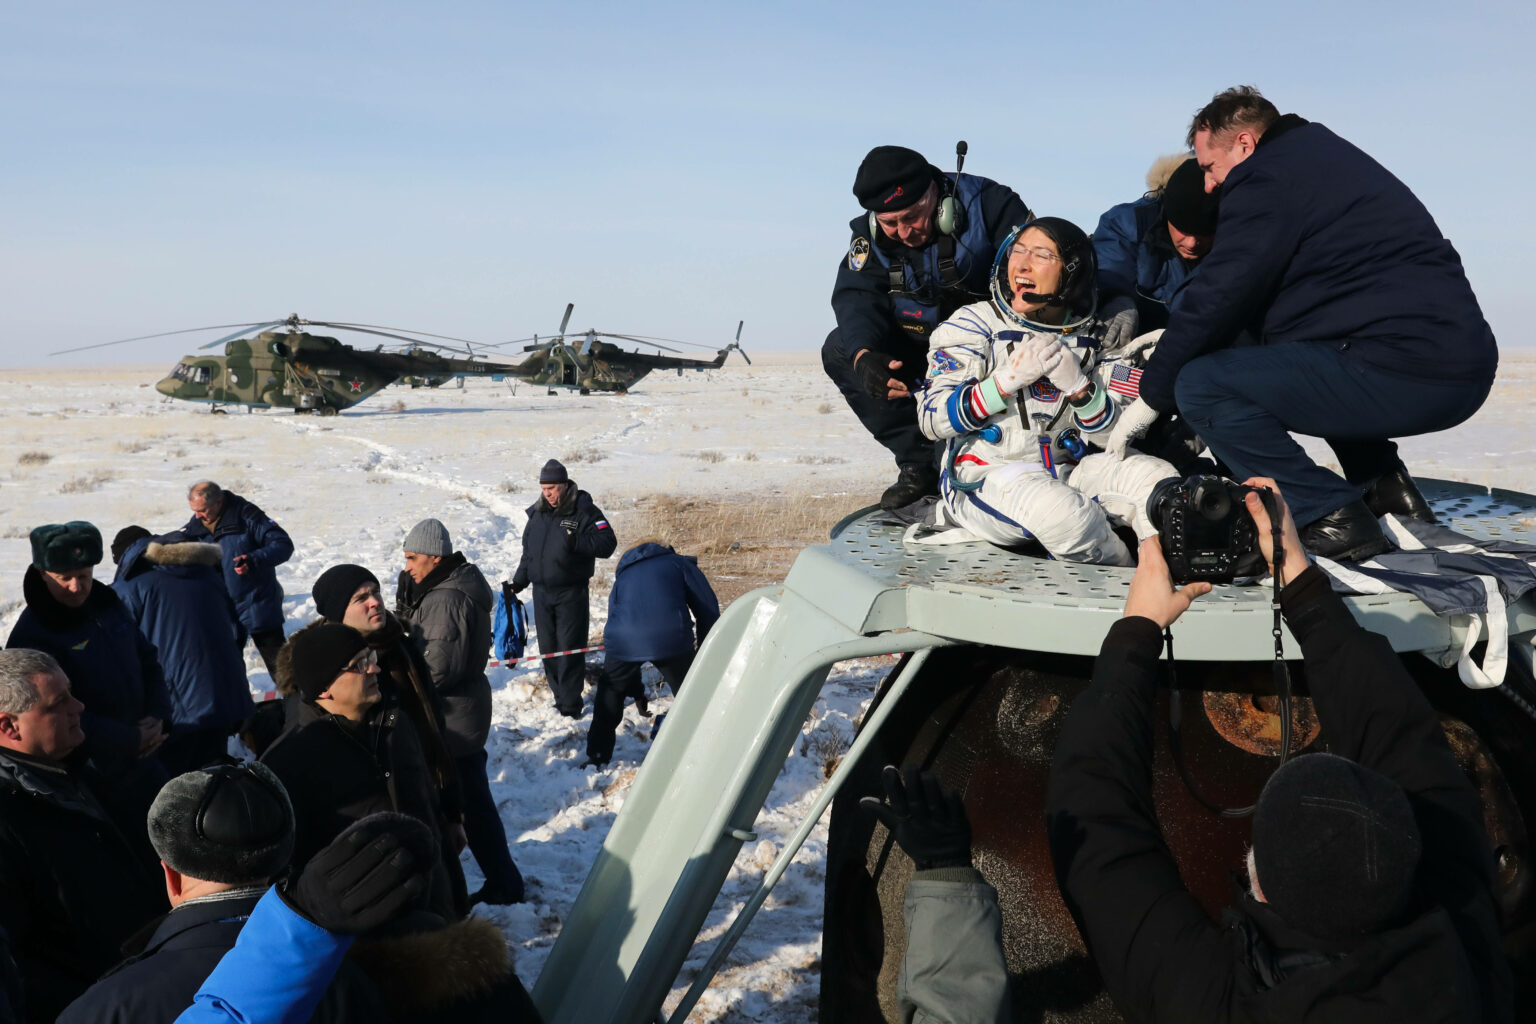 IMAGO / ITAR-TASS / Alexander Ryumin | Christina Koch (NASA) after the landing of the space capsule of the Soyuz MS-13 spacecraft. February 6, 2020.